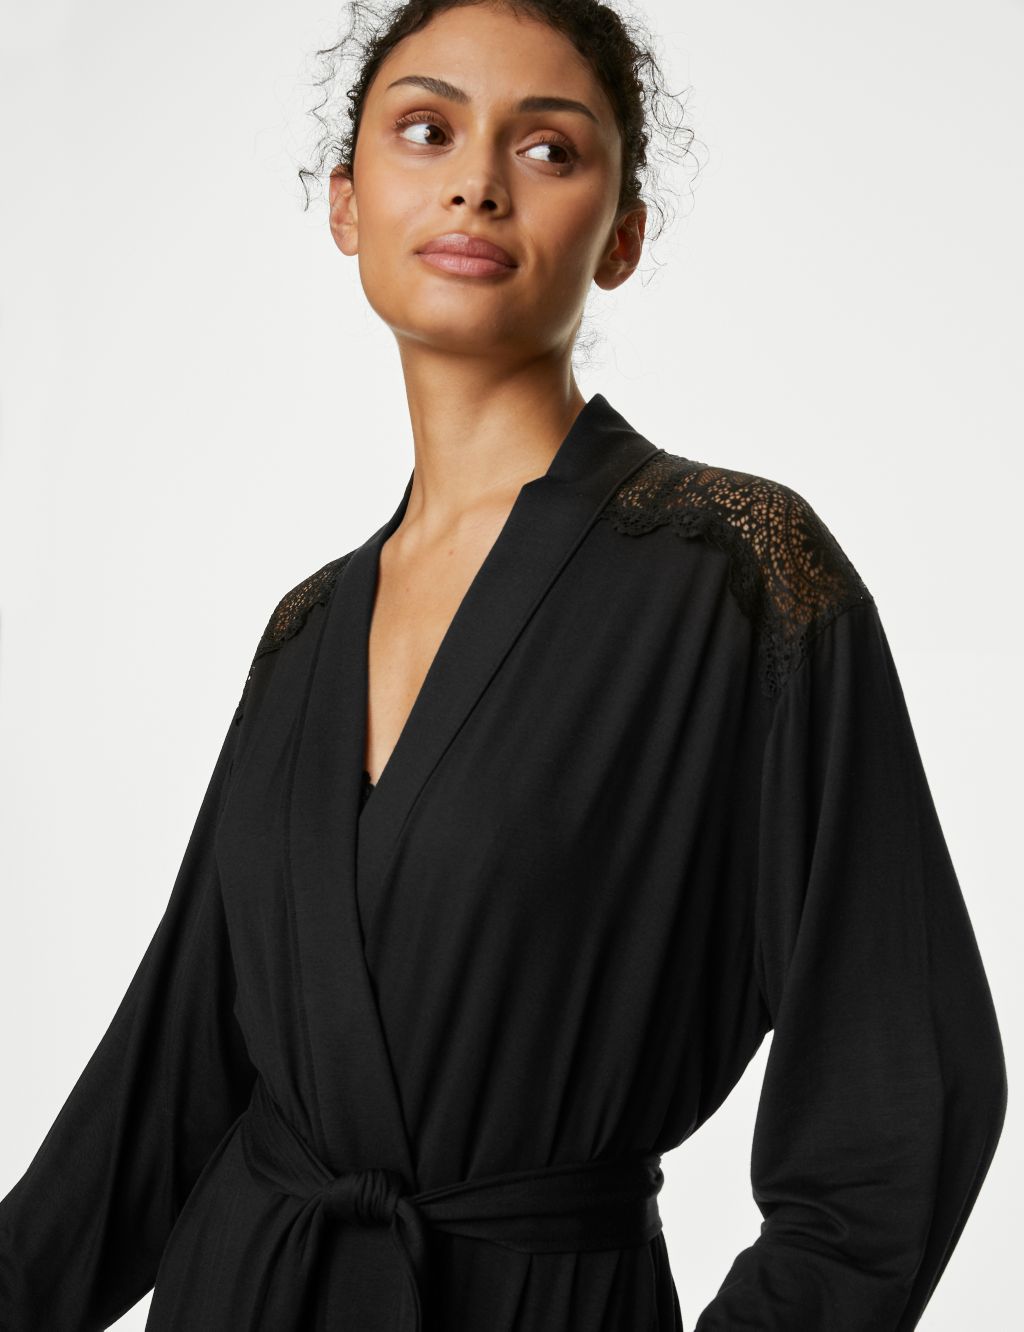 Body Soft™ Lace Detail Short Dressing Gown image 3